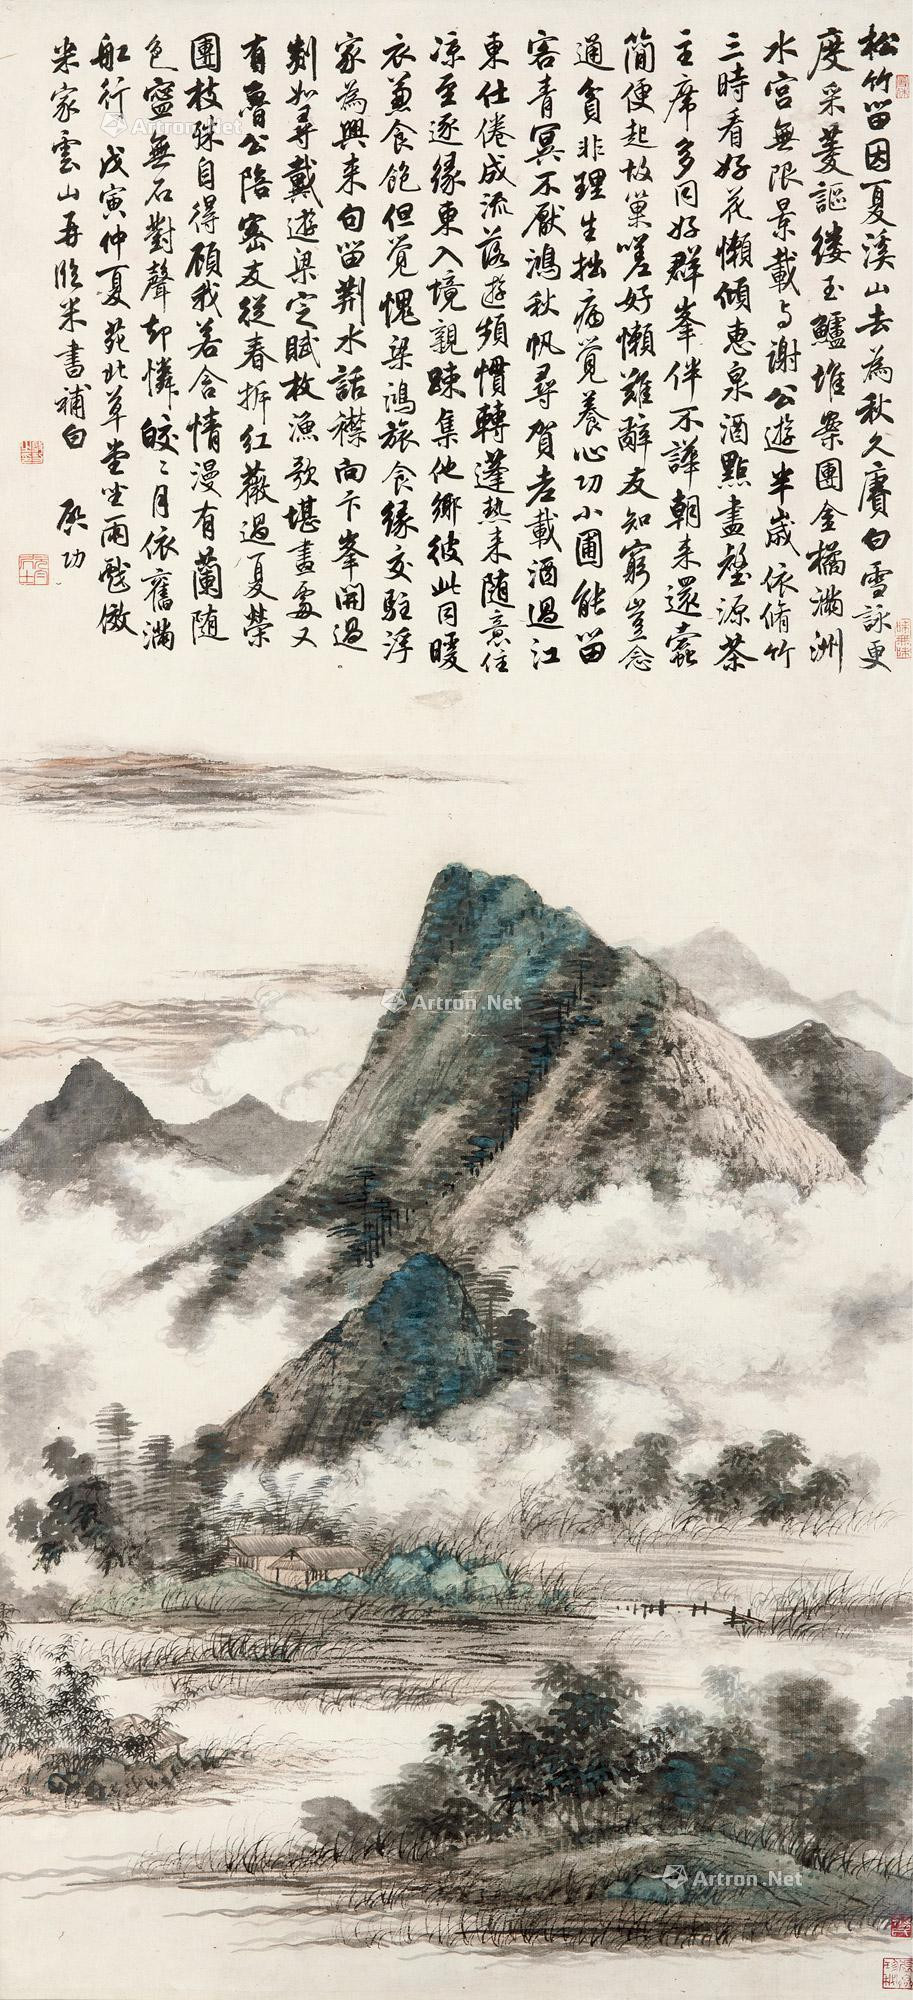 MOUNTAIN WITH CLOUDS